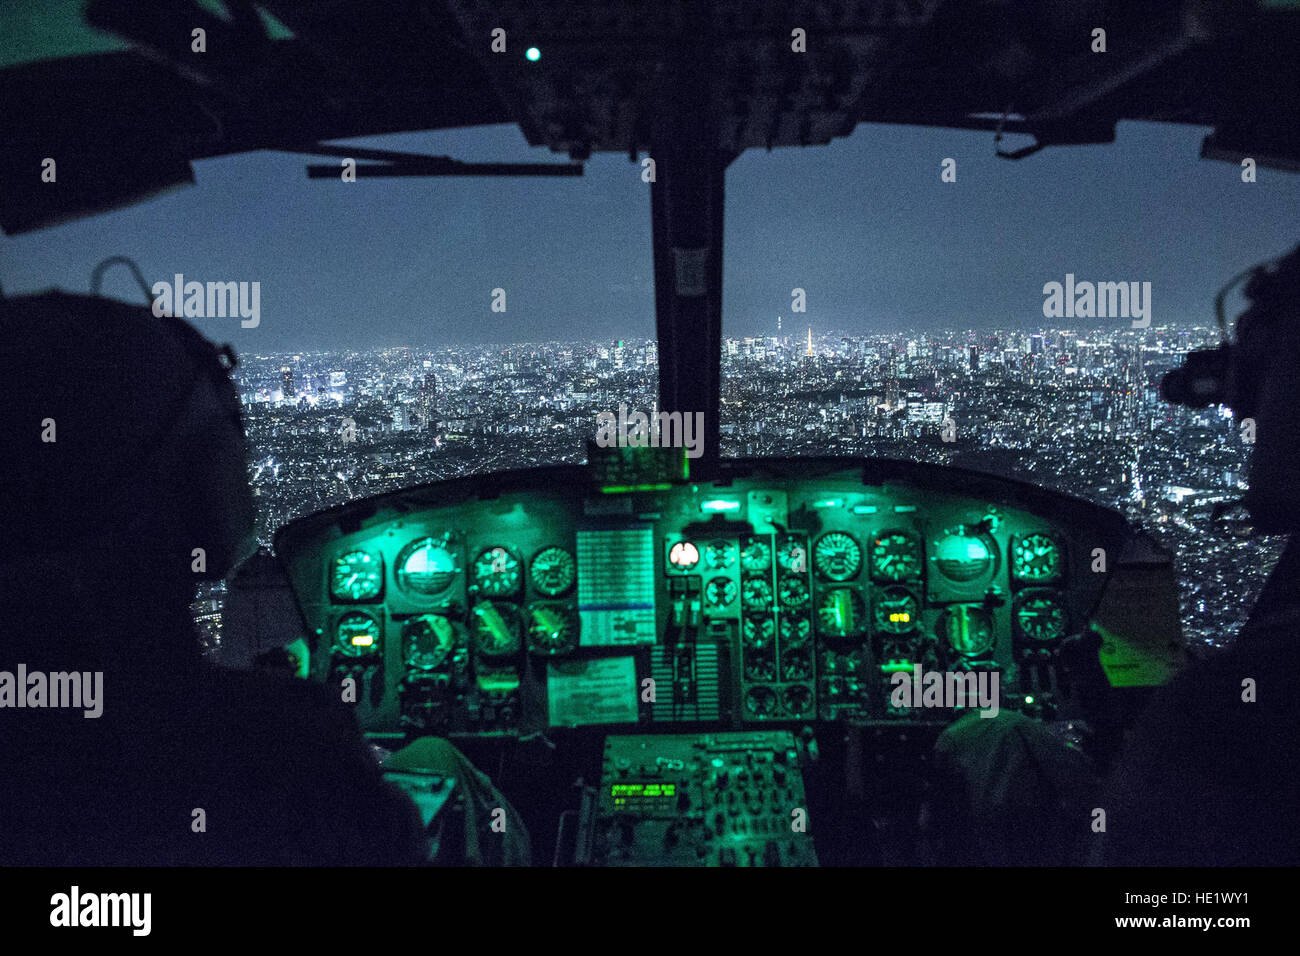 Capt. Jonathan Bonilla and 1st Lt. Vicente Vasquez, 459th Airlift Squadron UH-1N Huey pilots, fly over Tokyo after completing night training April 25, 2016. The 459th AS frequently trains on a multitude of scenarios in preparation for potential real-world contingencies and operations. /Yasuo Osakabe Stock Photo